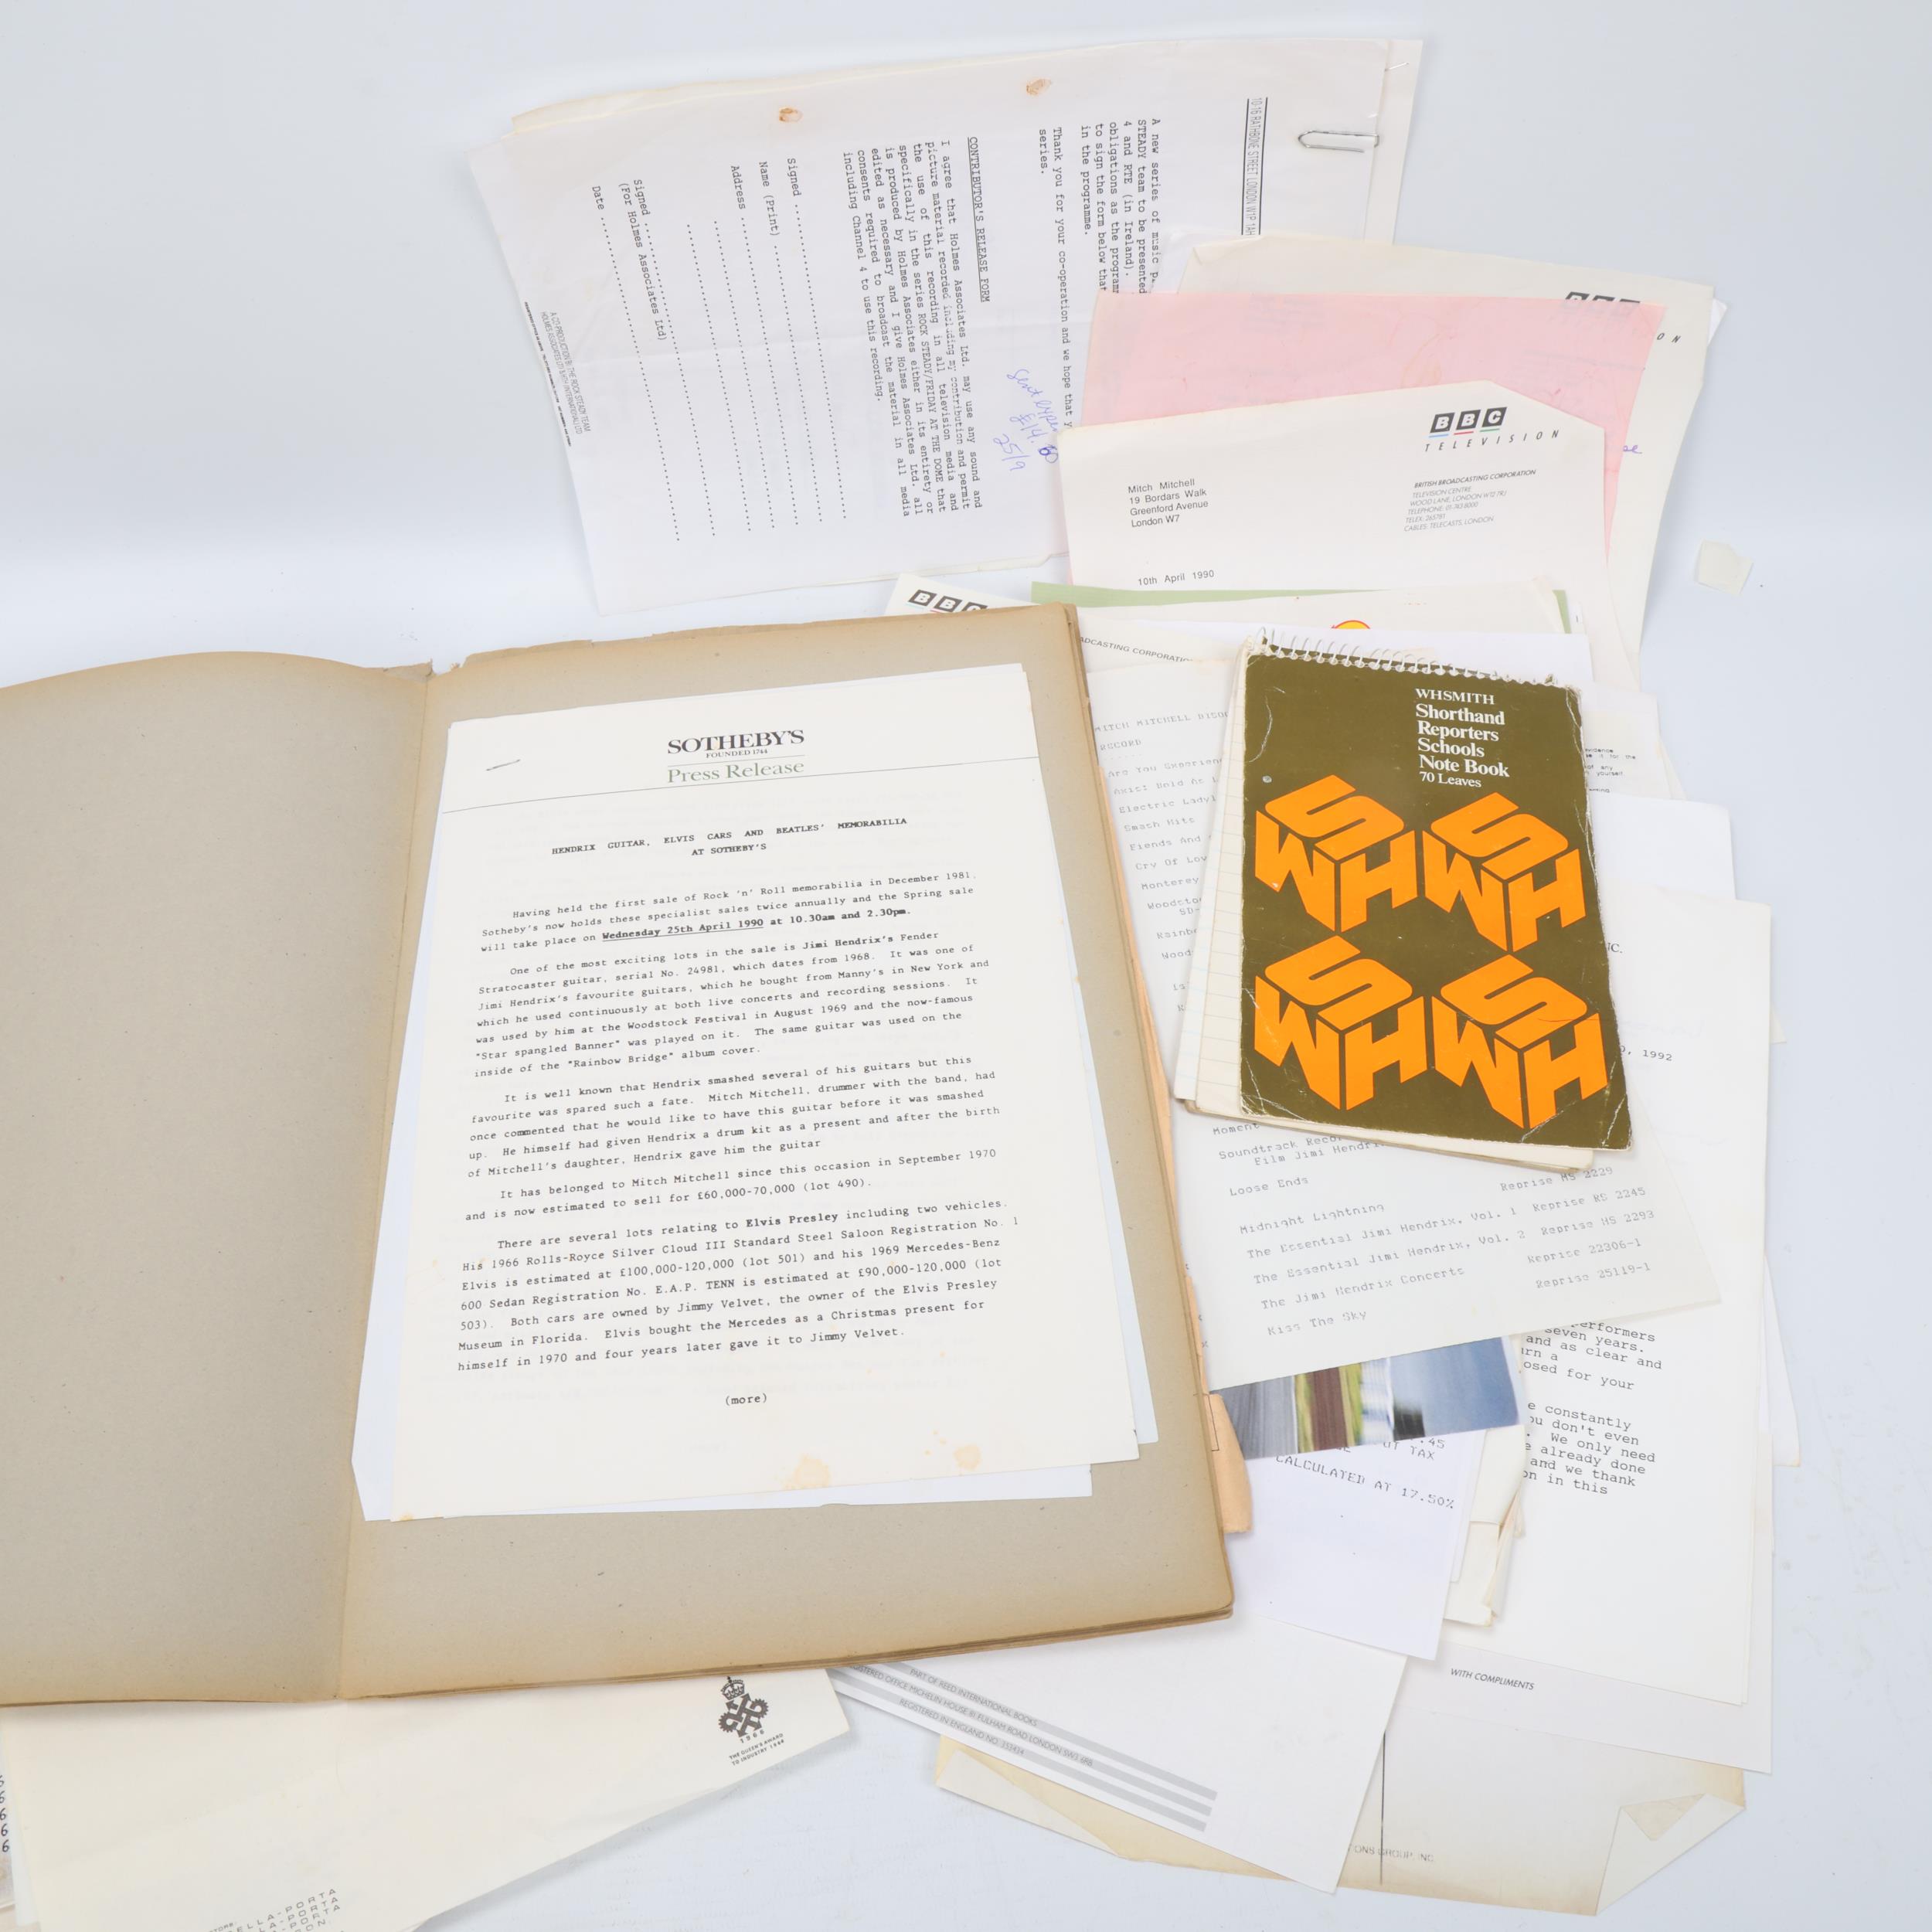 MITCH MITCHELL / JIMI HENDRIX. A Quantity of CONTRACTS, SCHEDULES, LETTERS Etc - Image 3 of 3